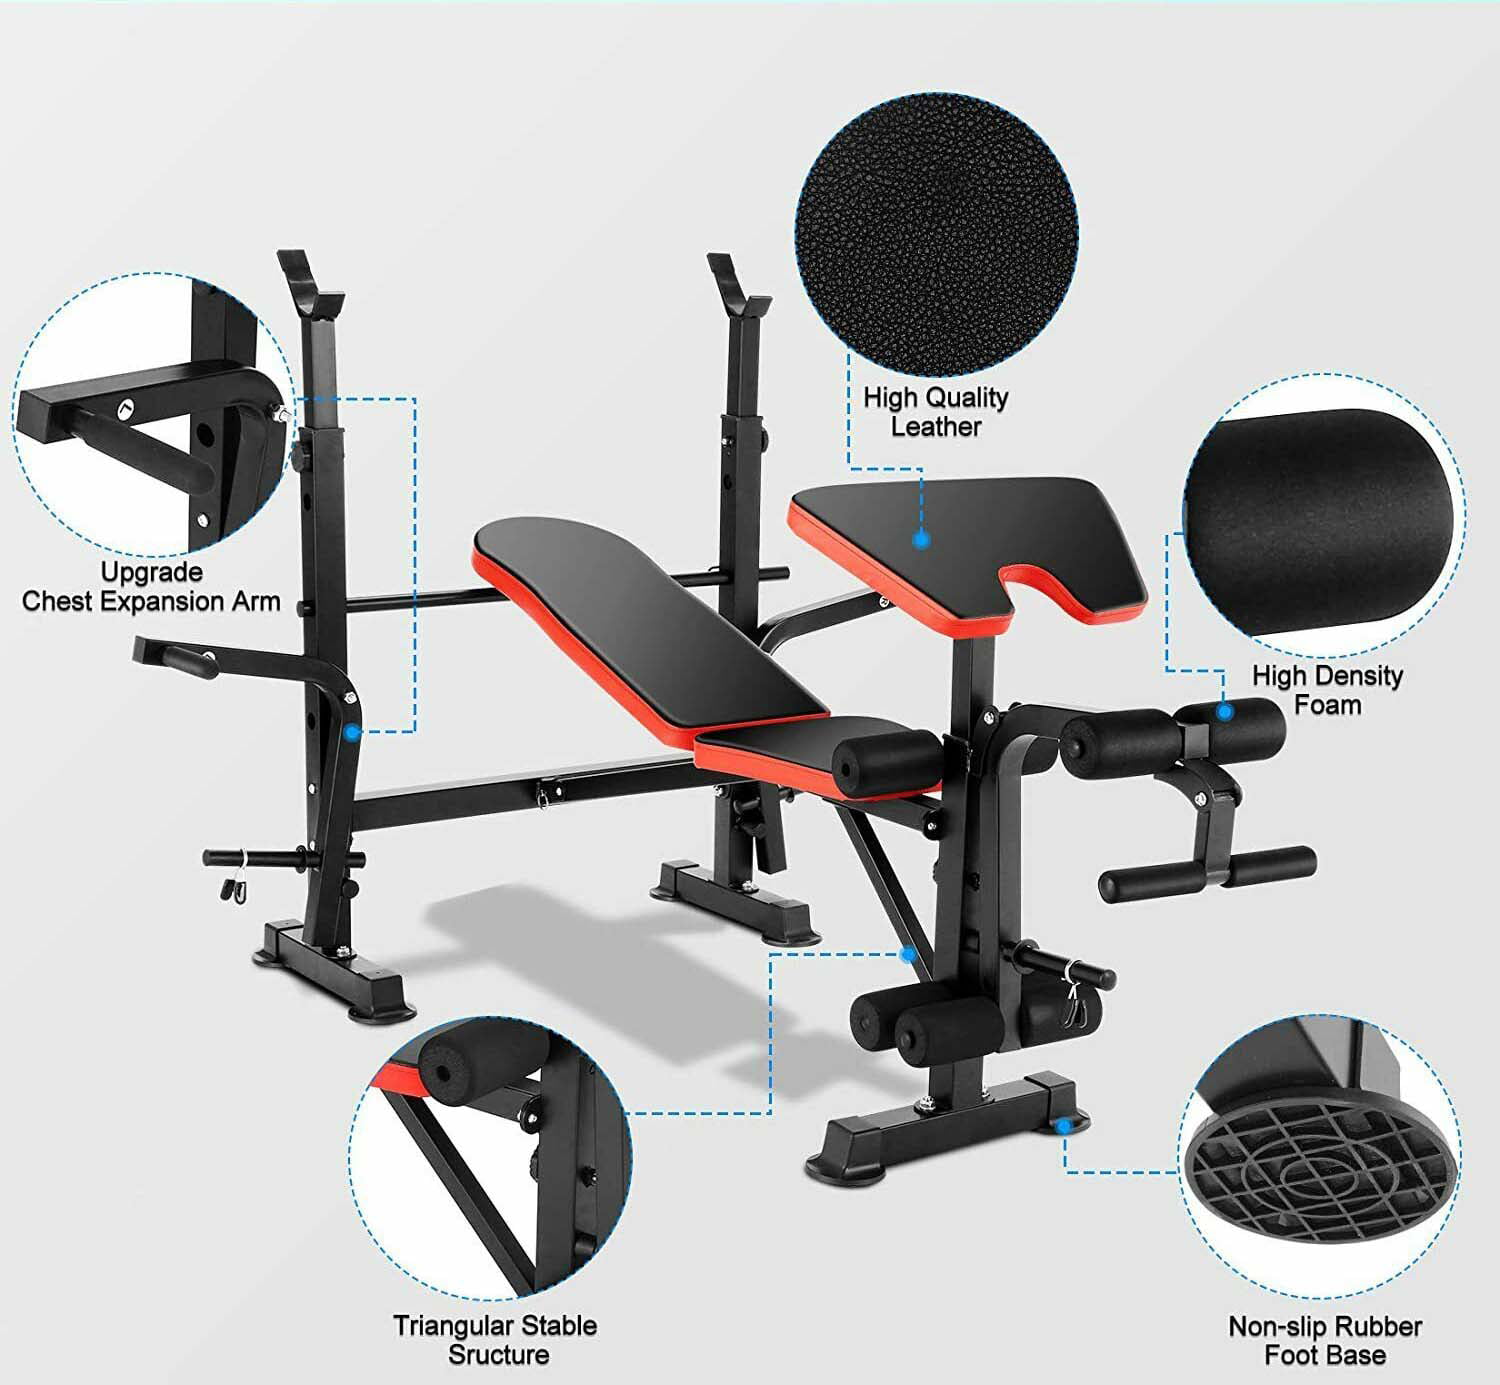 6 Gear Angle Adjustable Adjustable Weight Bench Gym for Office Double Triangular Support Design More Stable Household Folding Fitness Chair 